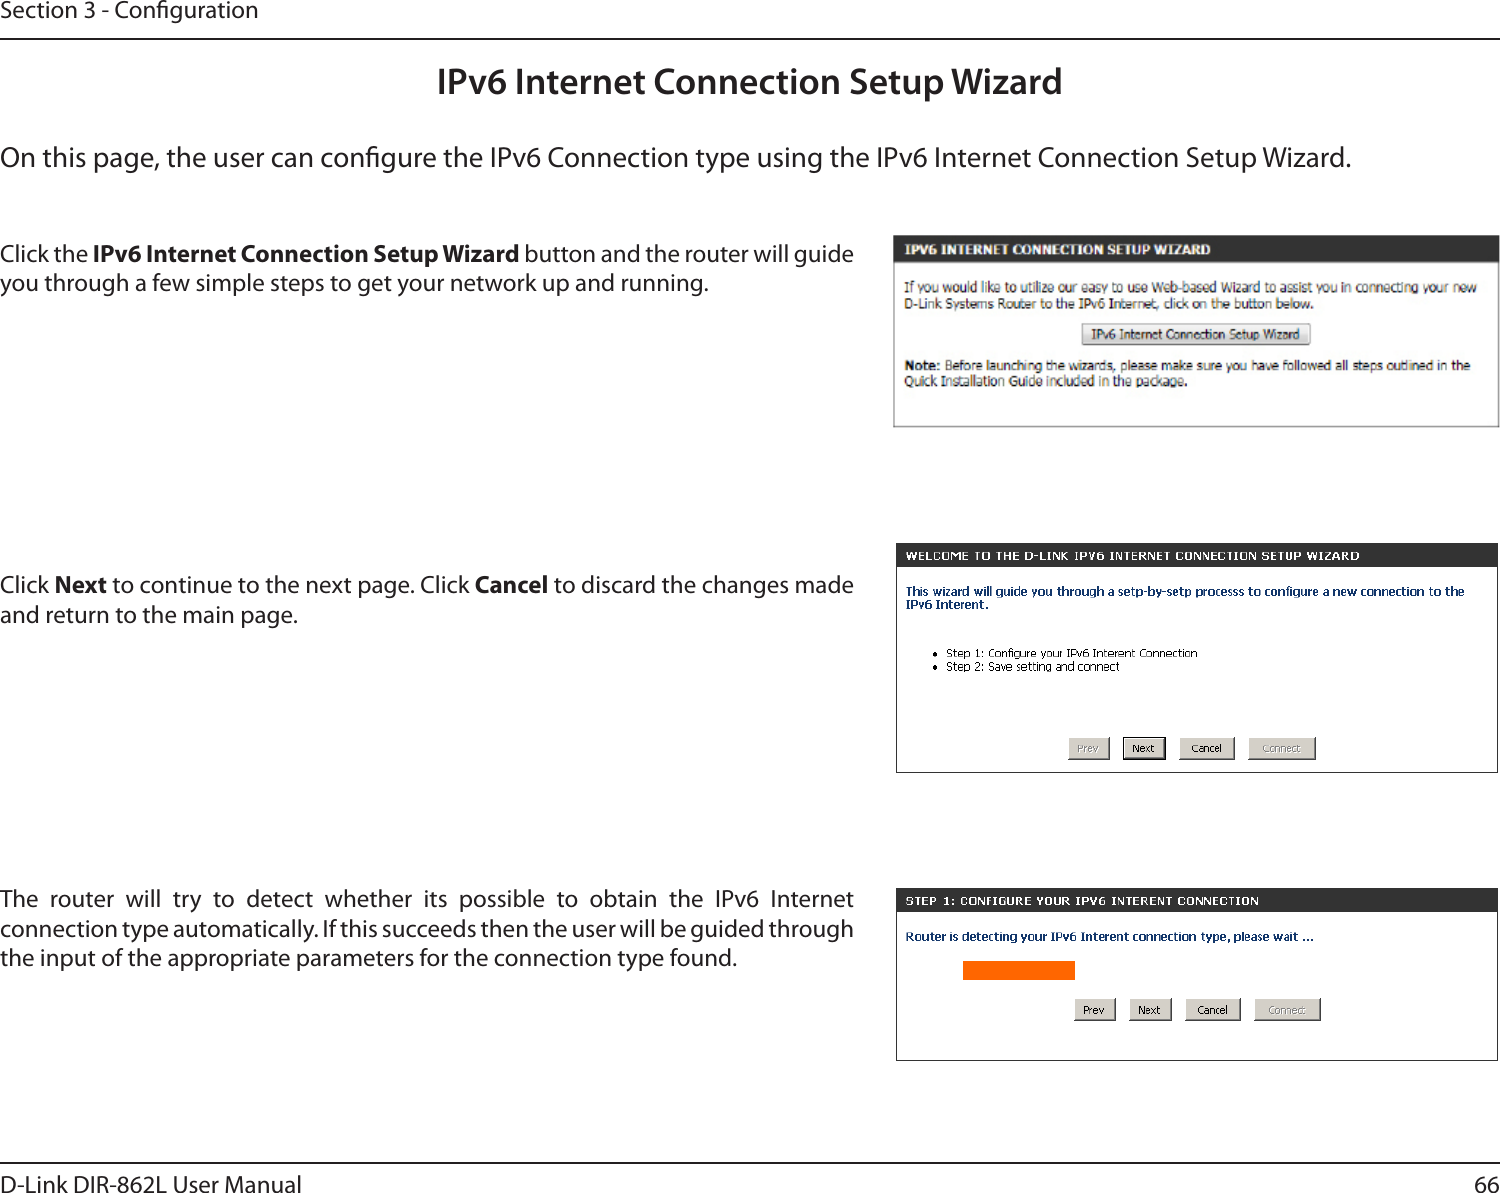 66D-Link DIR-862L User ManualSection 3 - CongurationIPv6 Internet Connection Setup WizardOn this page, the user can congure the IPv6 Connection type using the IPv6 Internet Connection Setup Wizard.Click the IPv6 Internet Connection Setup Wizard button and the router will guide you through a few simple steps to get your network up and running.Click Next to continue to the next page. Click Cancel to discard the changes made and return to the main page.The router will try to detect whether its possible to obtain the IPv6 Internet connection type automatically. If this succeeds then the user will be guided through the input of the appropriate parameters for the connection type found.